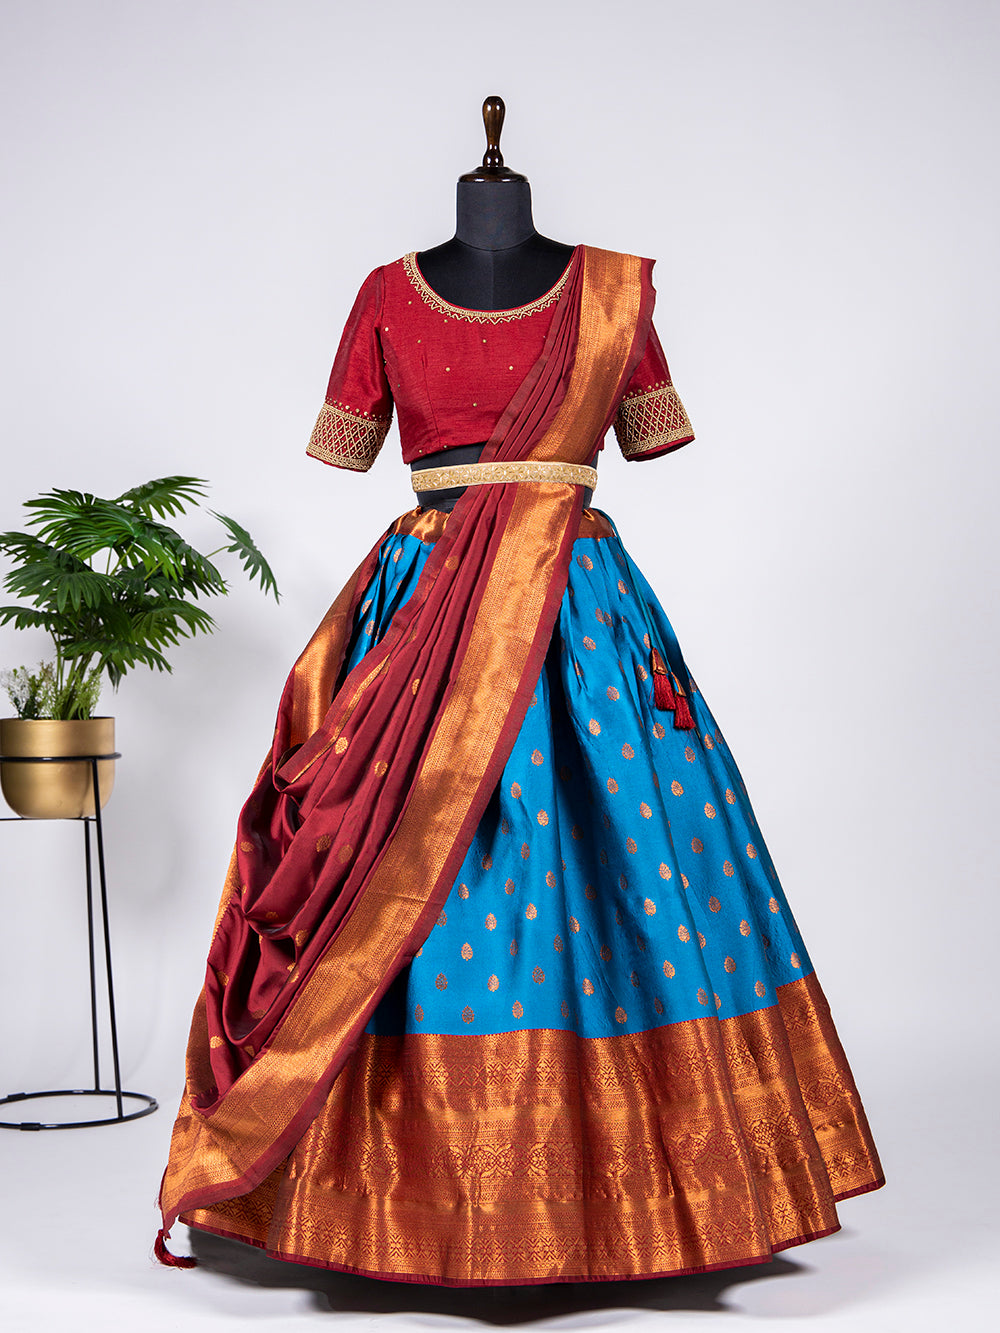 South Indian Lehenga - Types and Styling